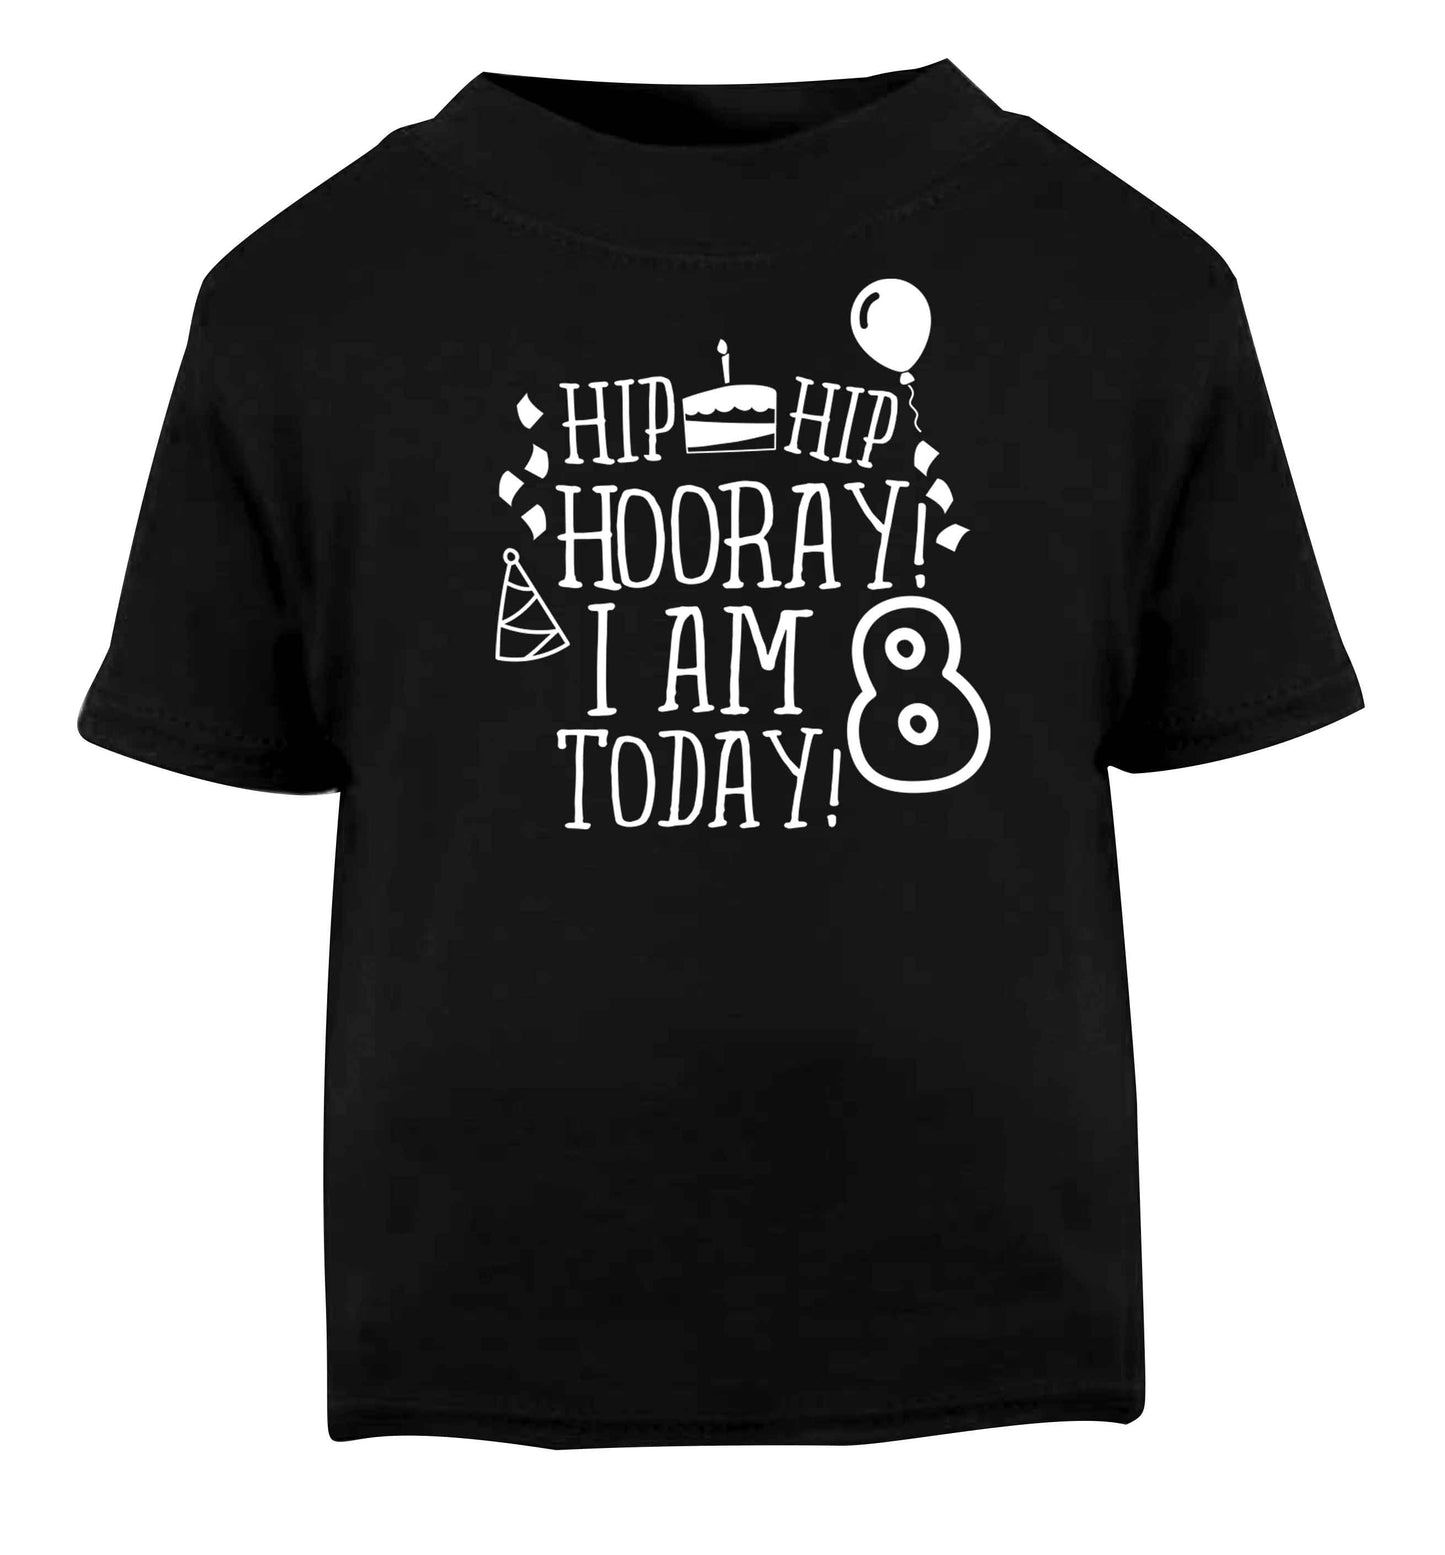 Hip hip hooray I am 8 today! Black baby toddler Tshirt 2 years